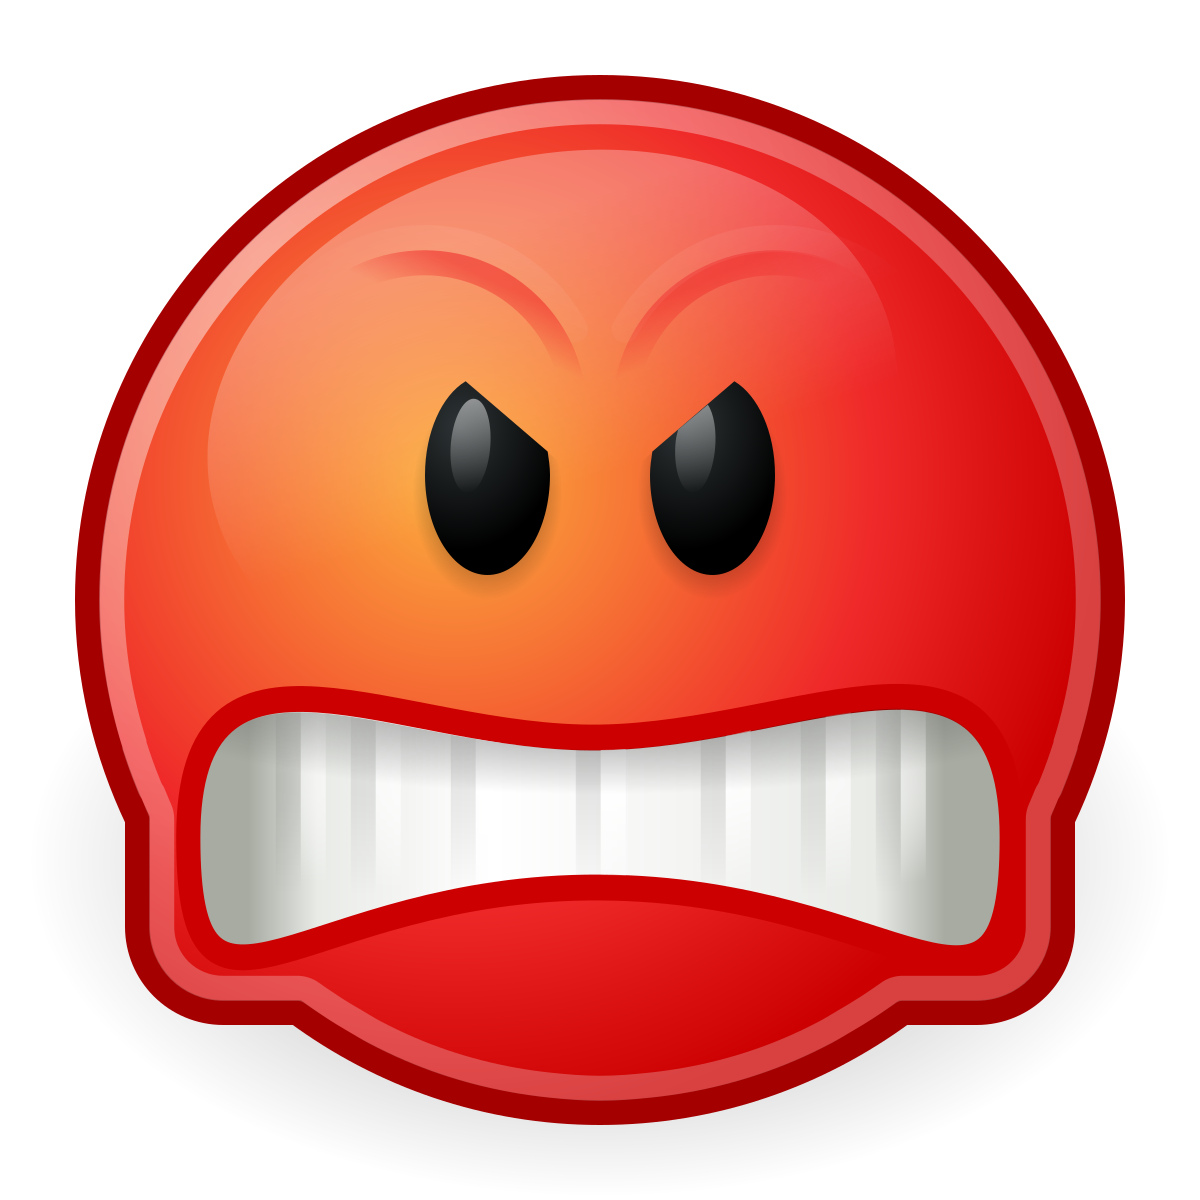 Gnome-face-angry.svg